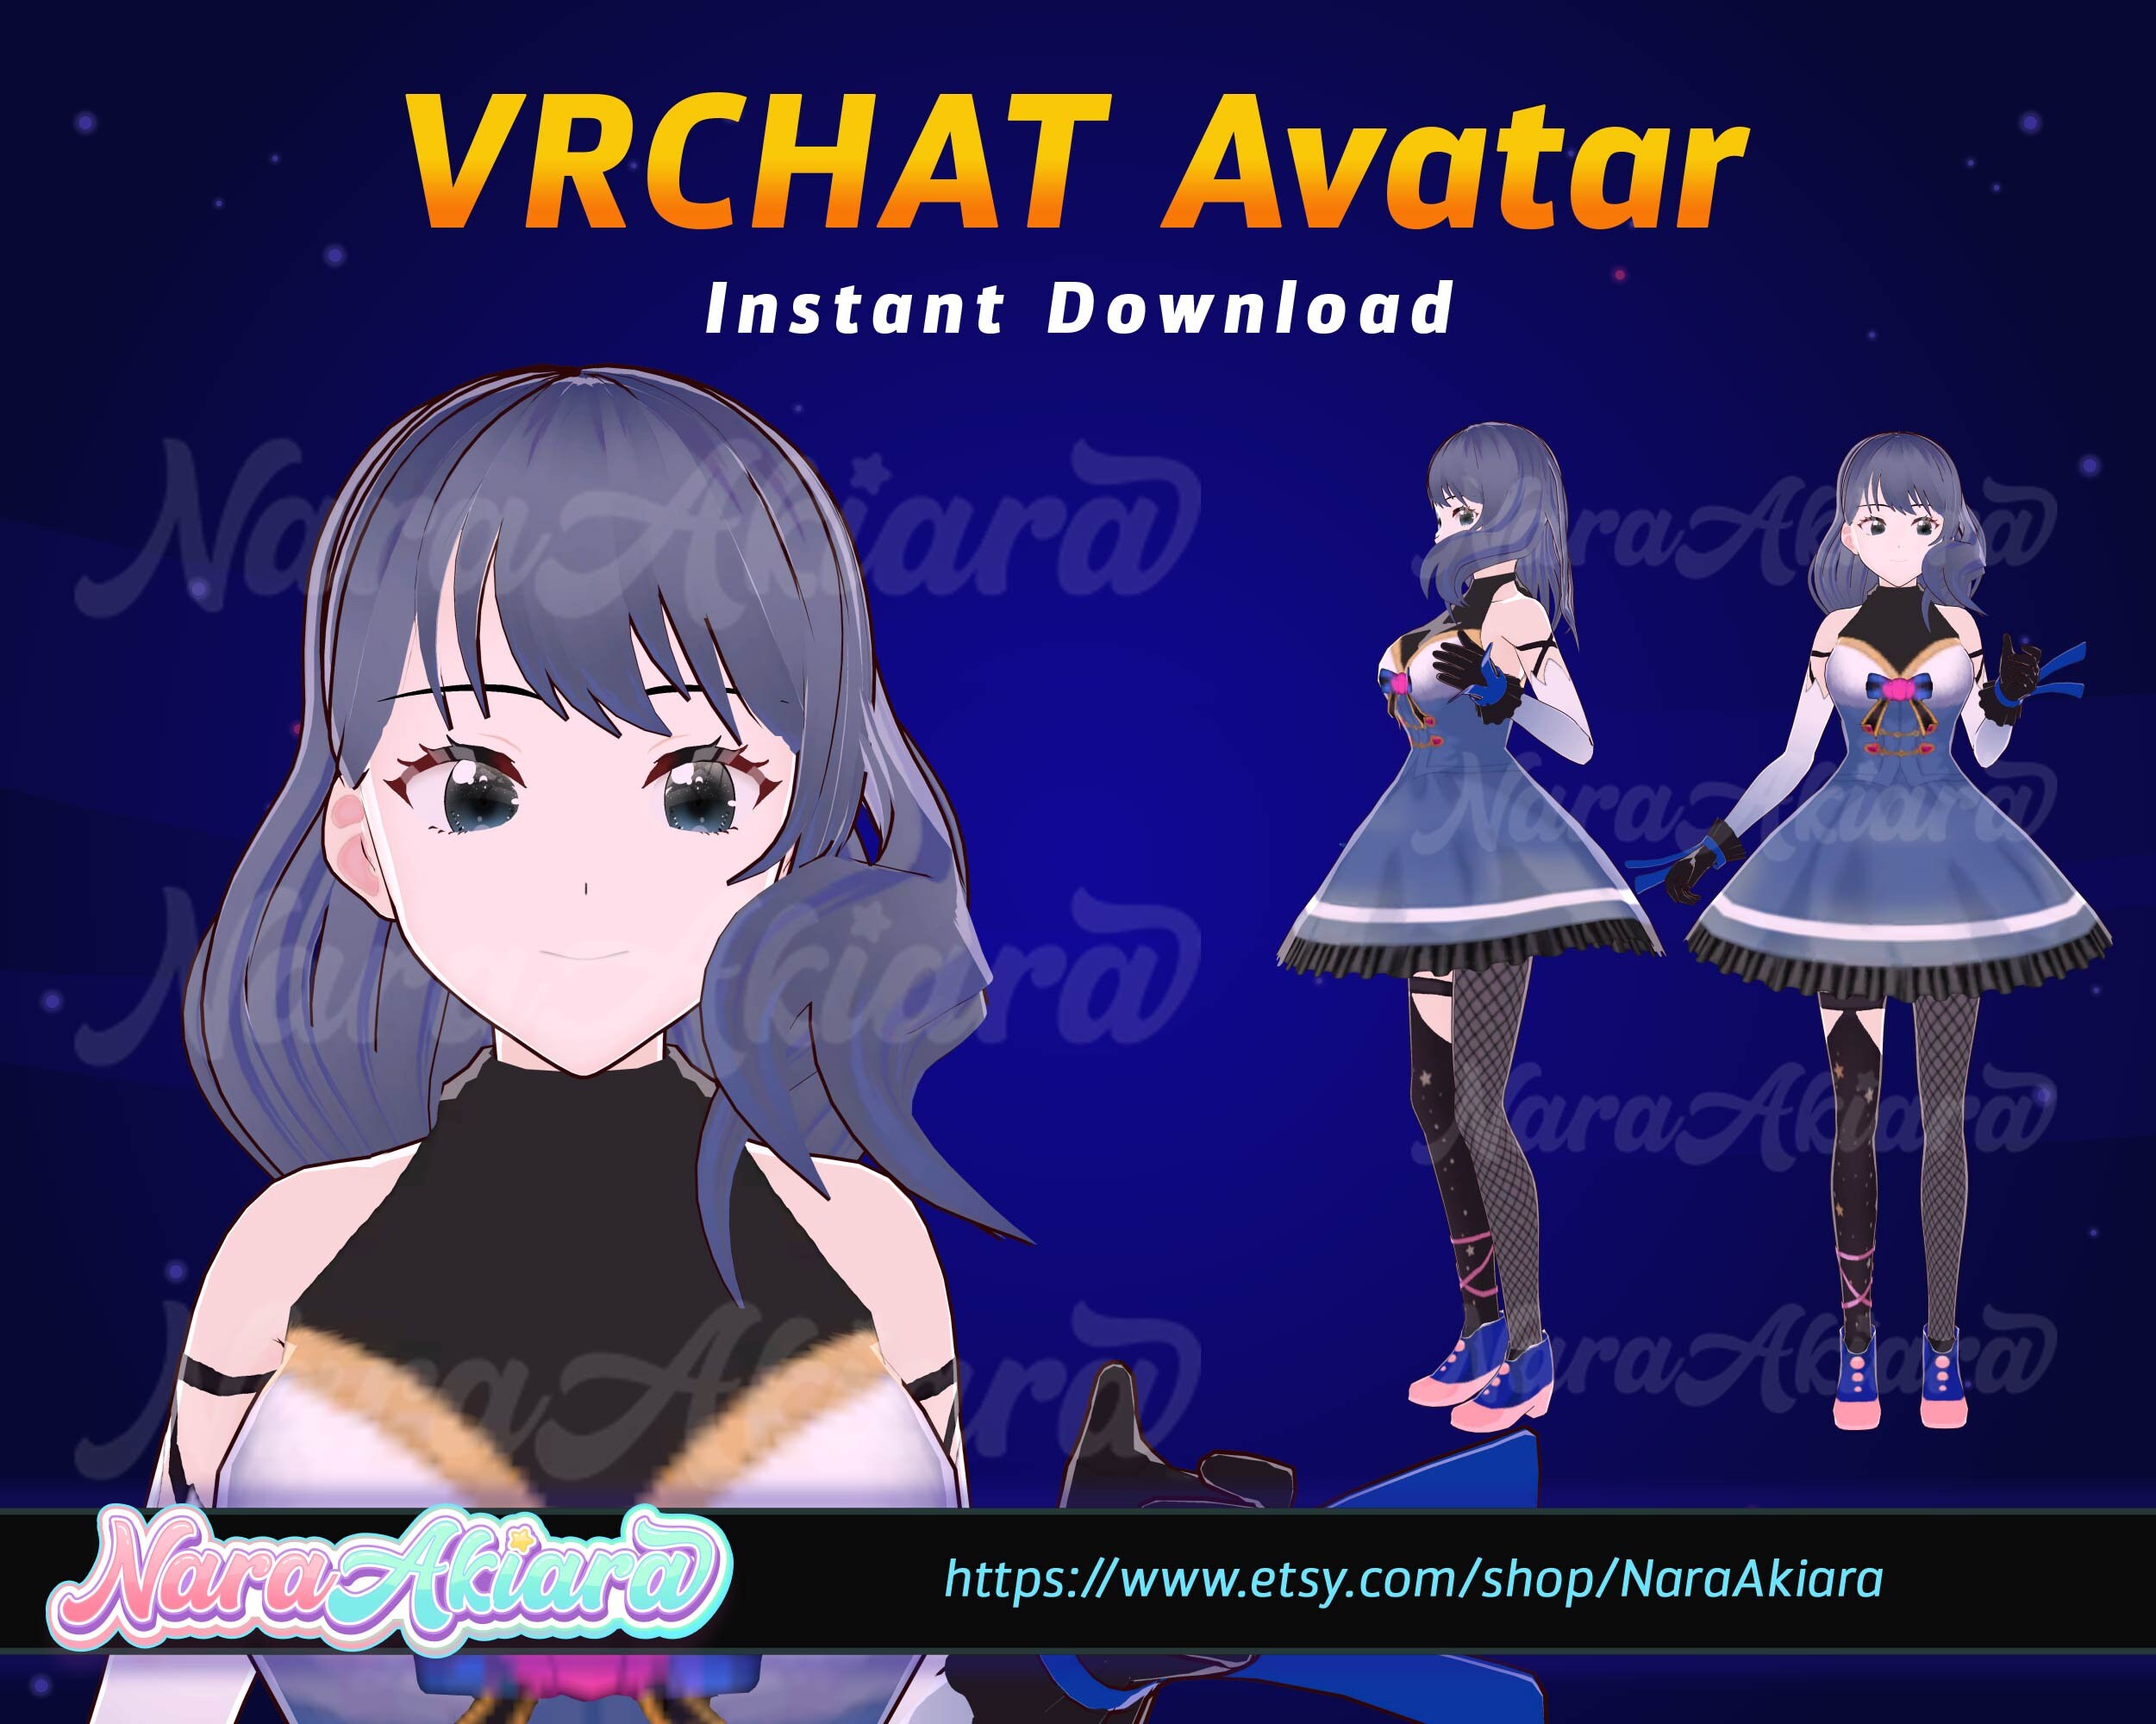 Showing off my VRChat models available for purchasedownload  gumroadcomriceballer  rVRchat